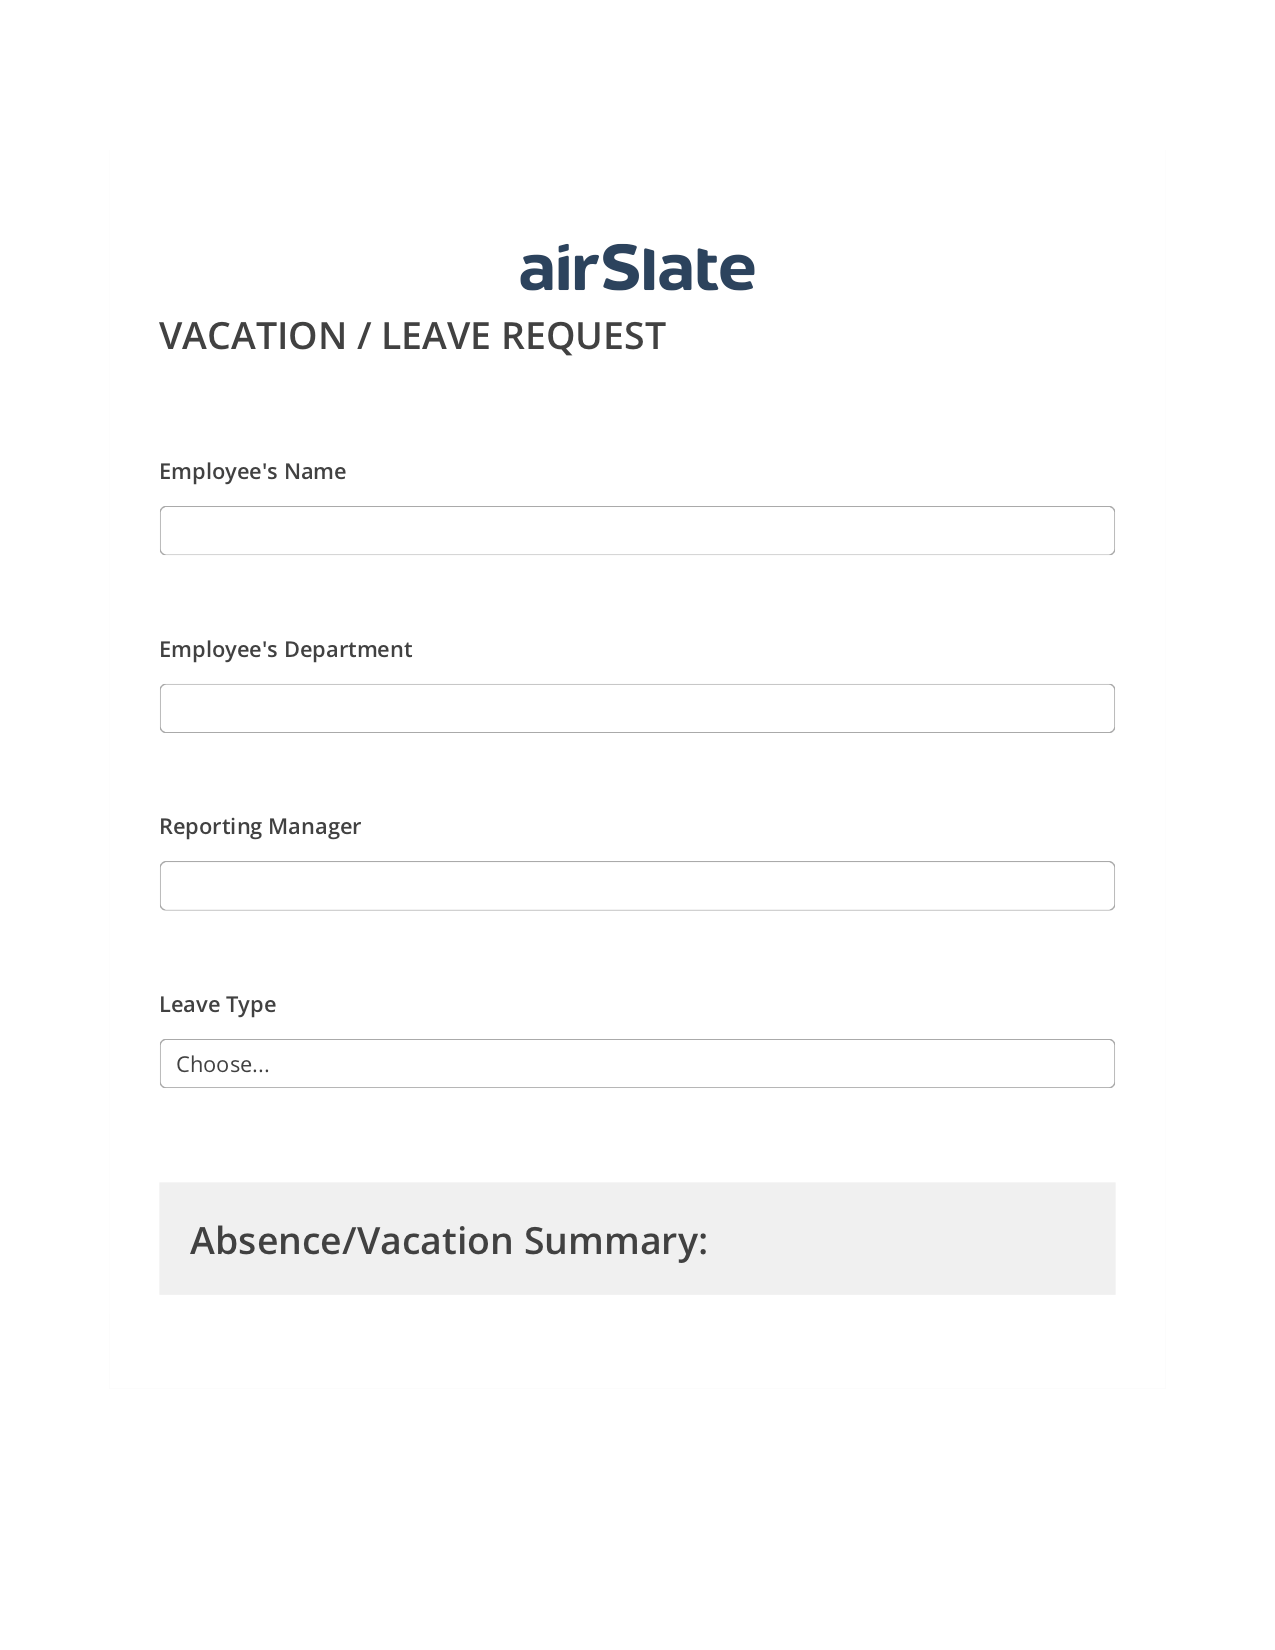 Vacation/Leave Request Workflow Pre-fill from Smartsheet Bot, Invoke Salesforce Process Bot, Export to Excel 365 Bot